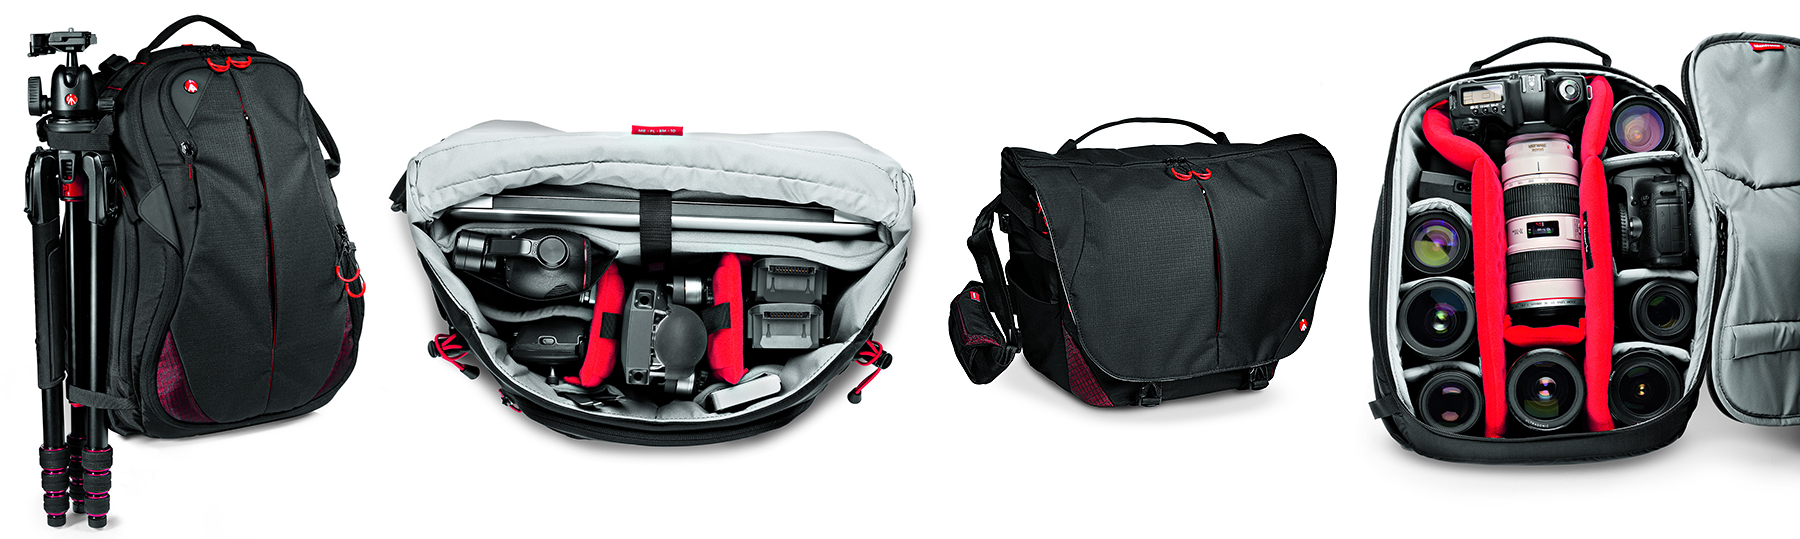 Manfrotto Bags Featured